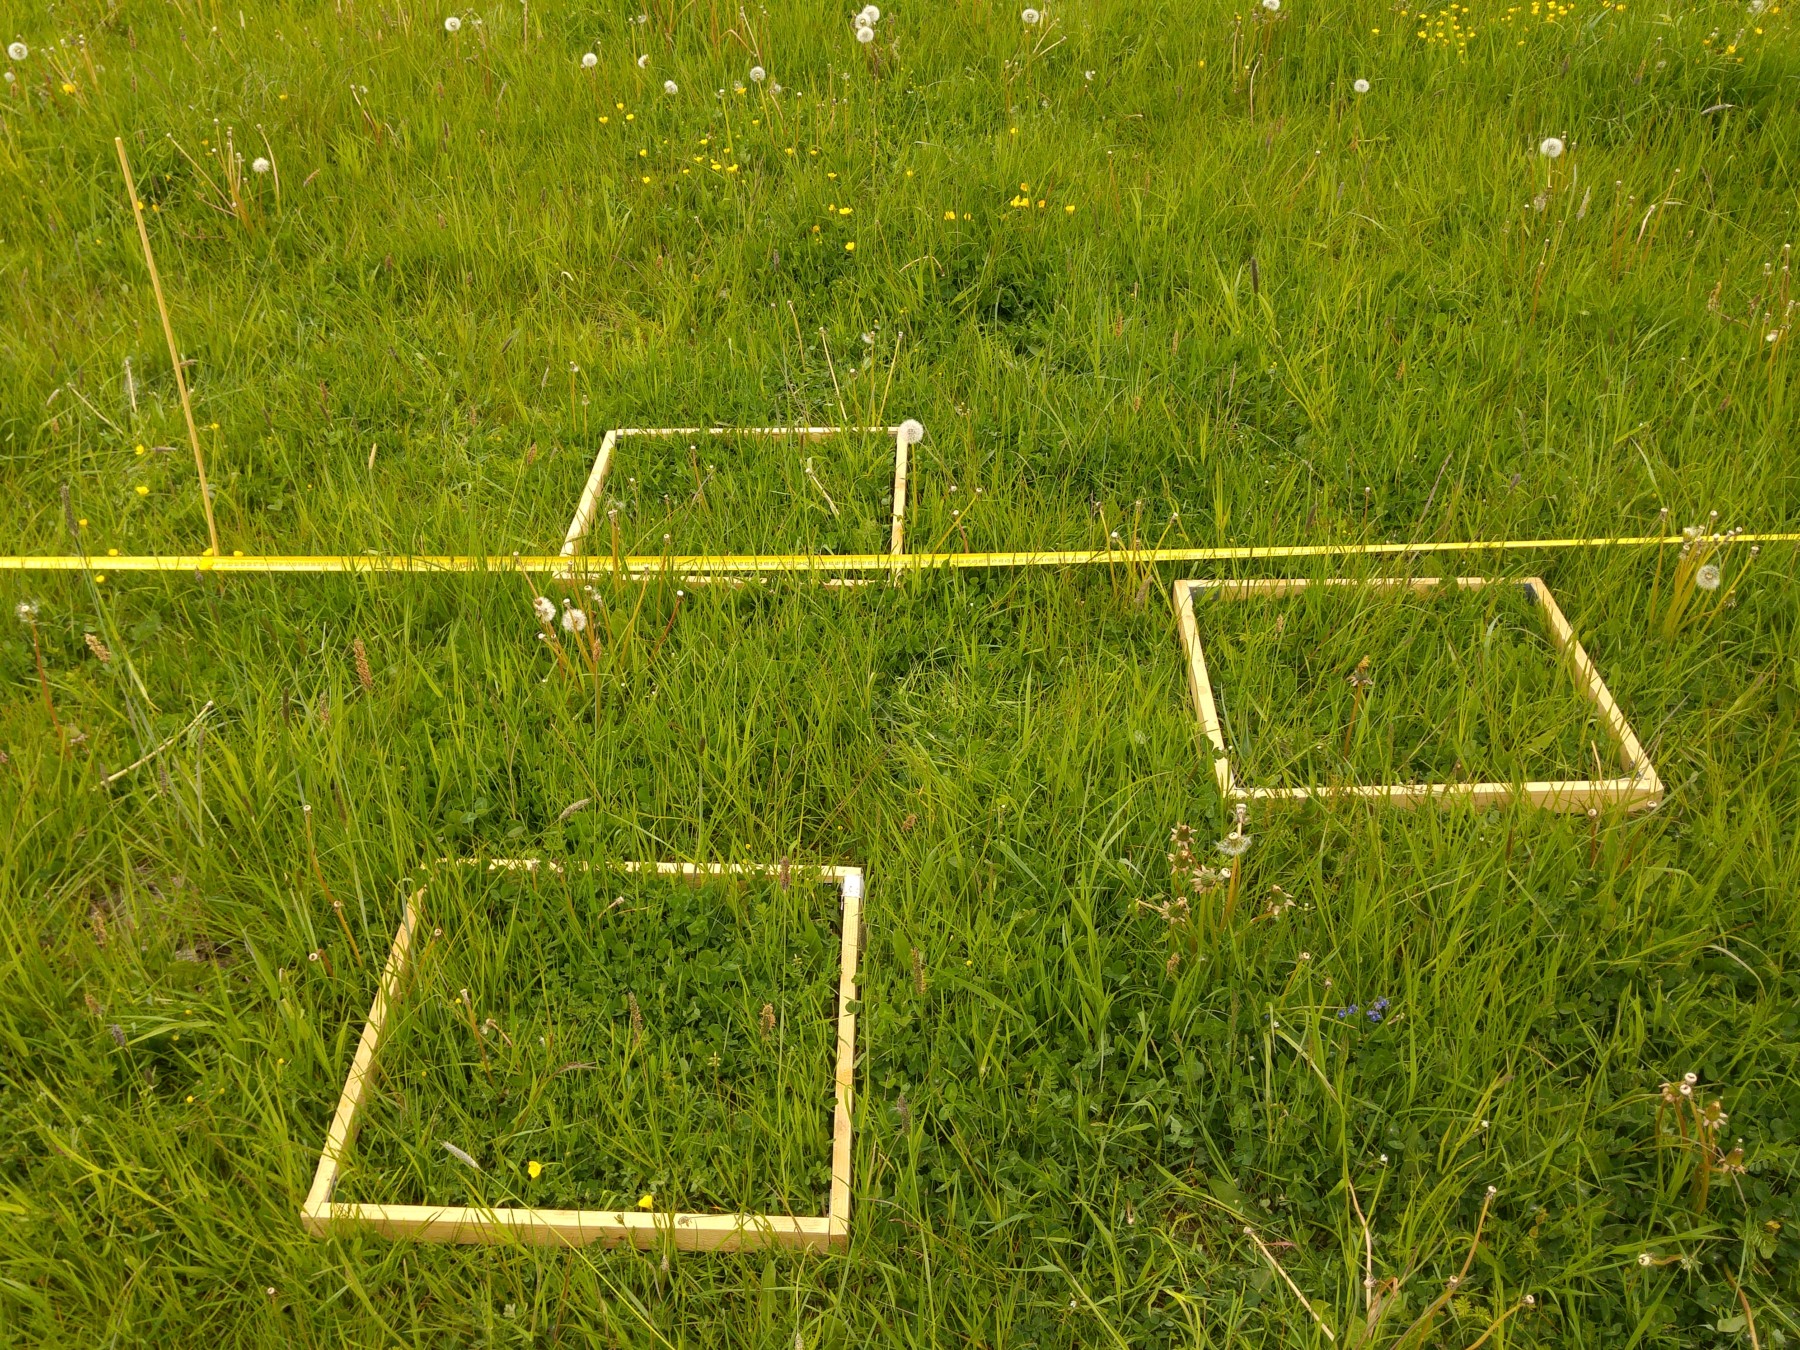 Picture: The photo shows a green meadow with three yellow square frames delimiting sampling areas. Across the image is a yellow band delimiting a plot. At the top left of the image is a thin marking stick stuck in the ground.